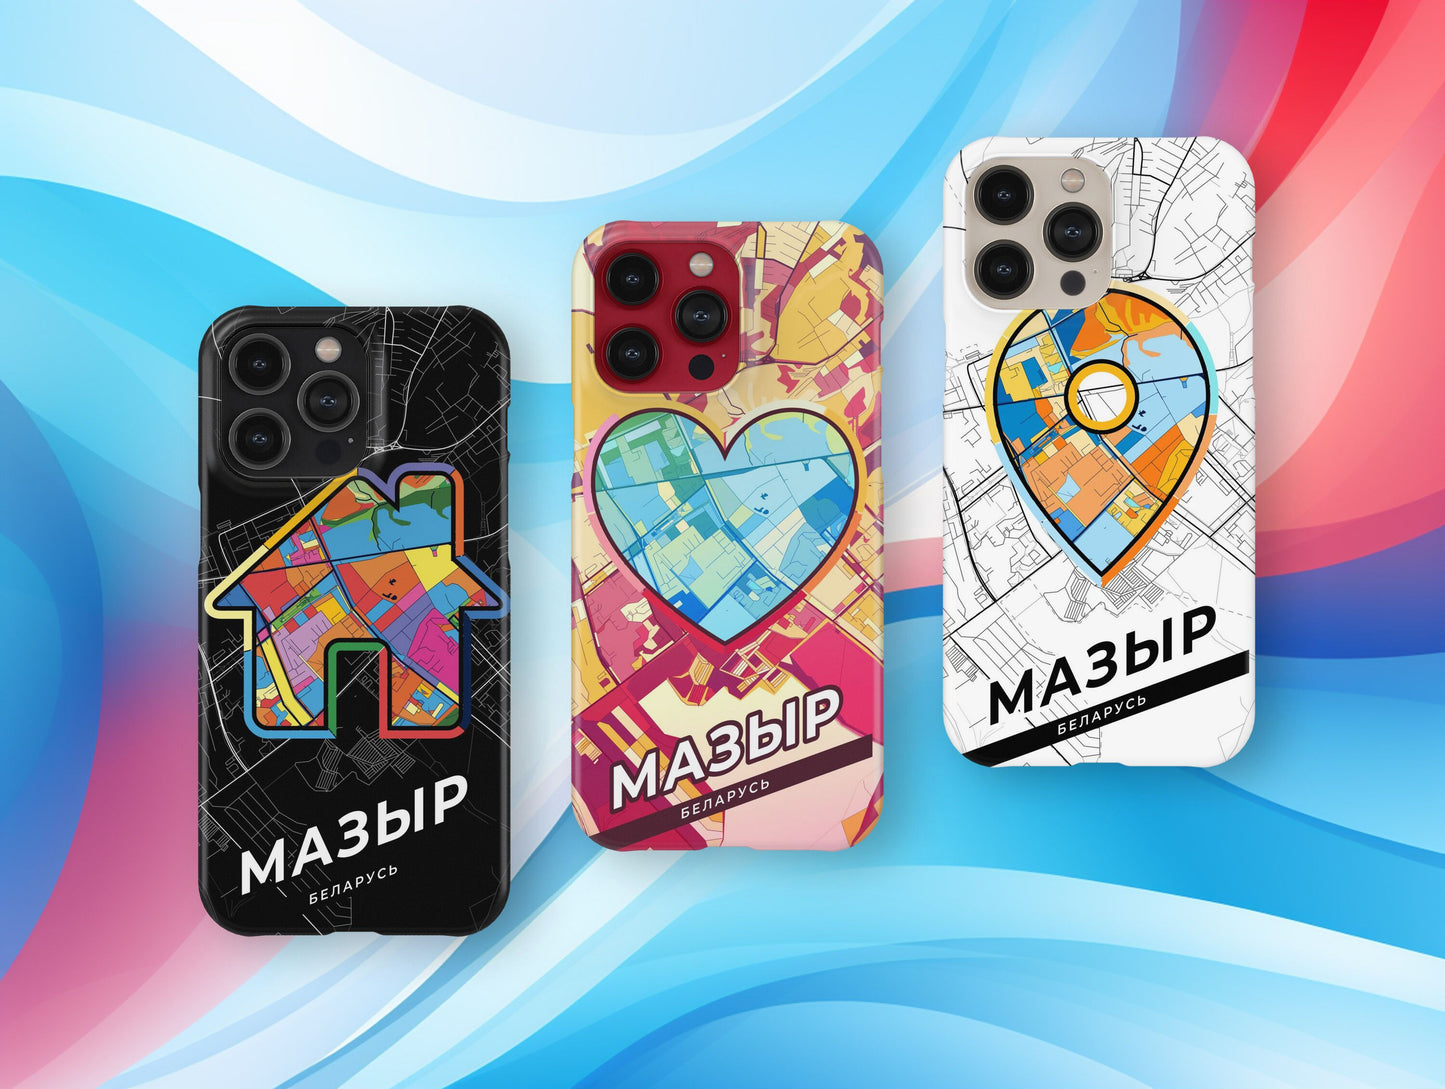 Мазыр Беларусь slim phone case with colorful icon